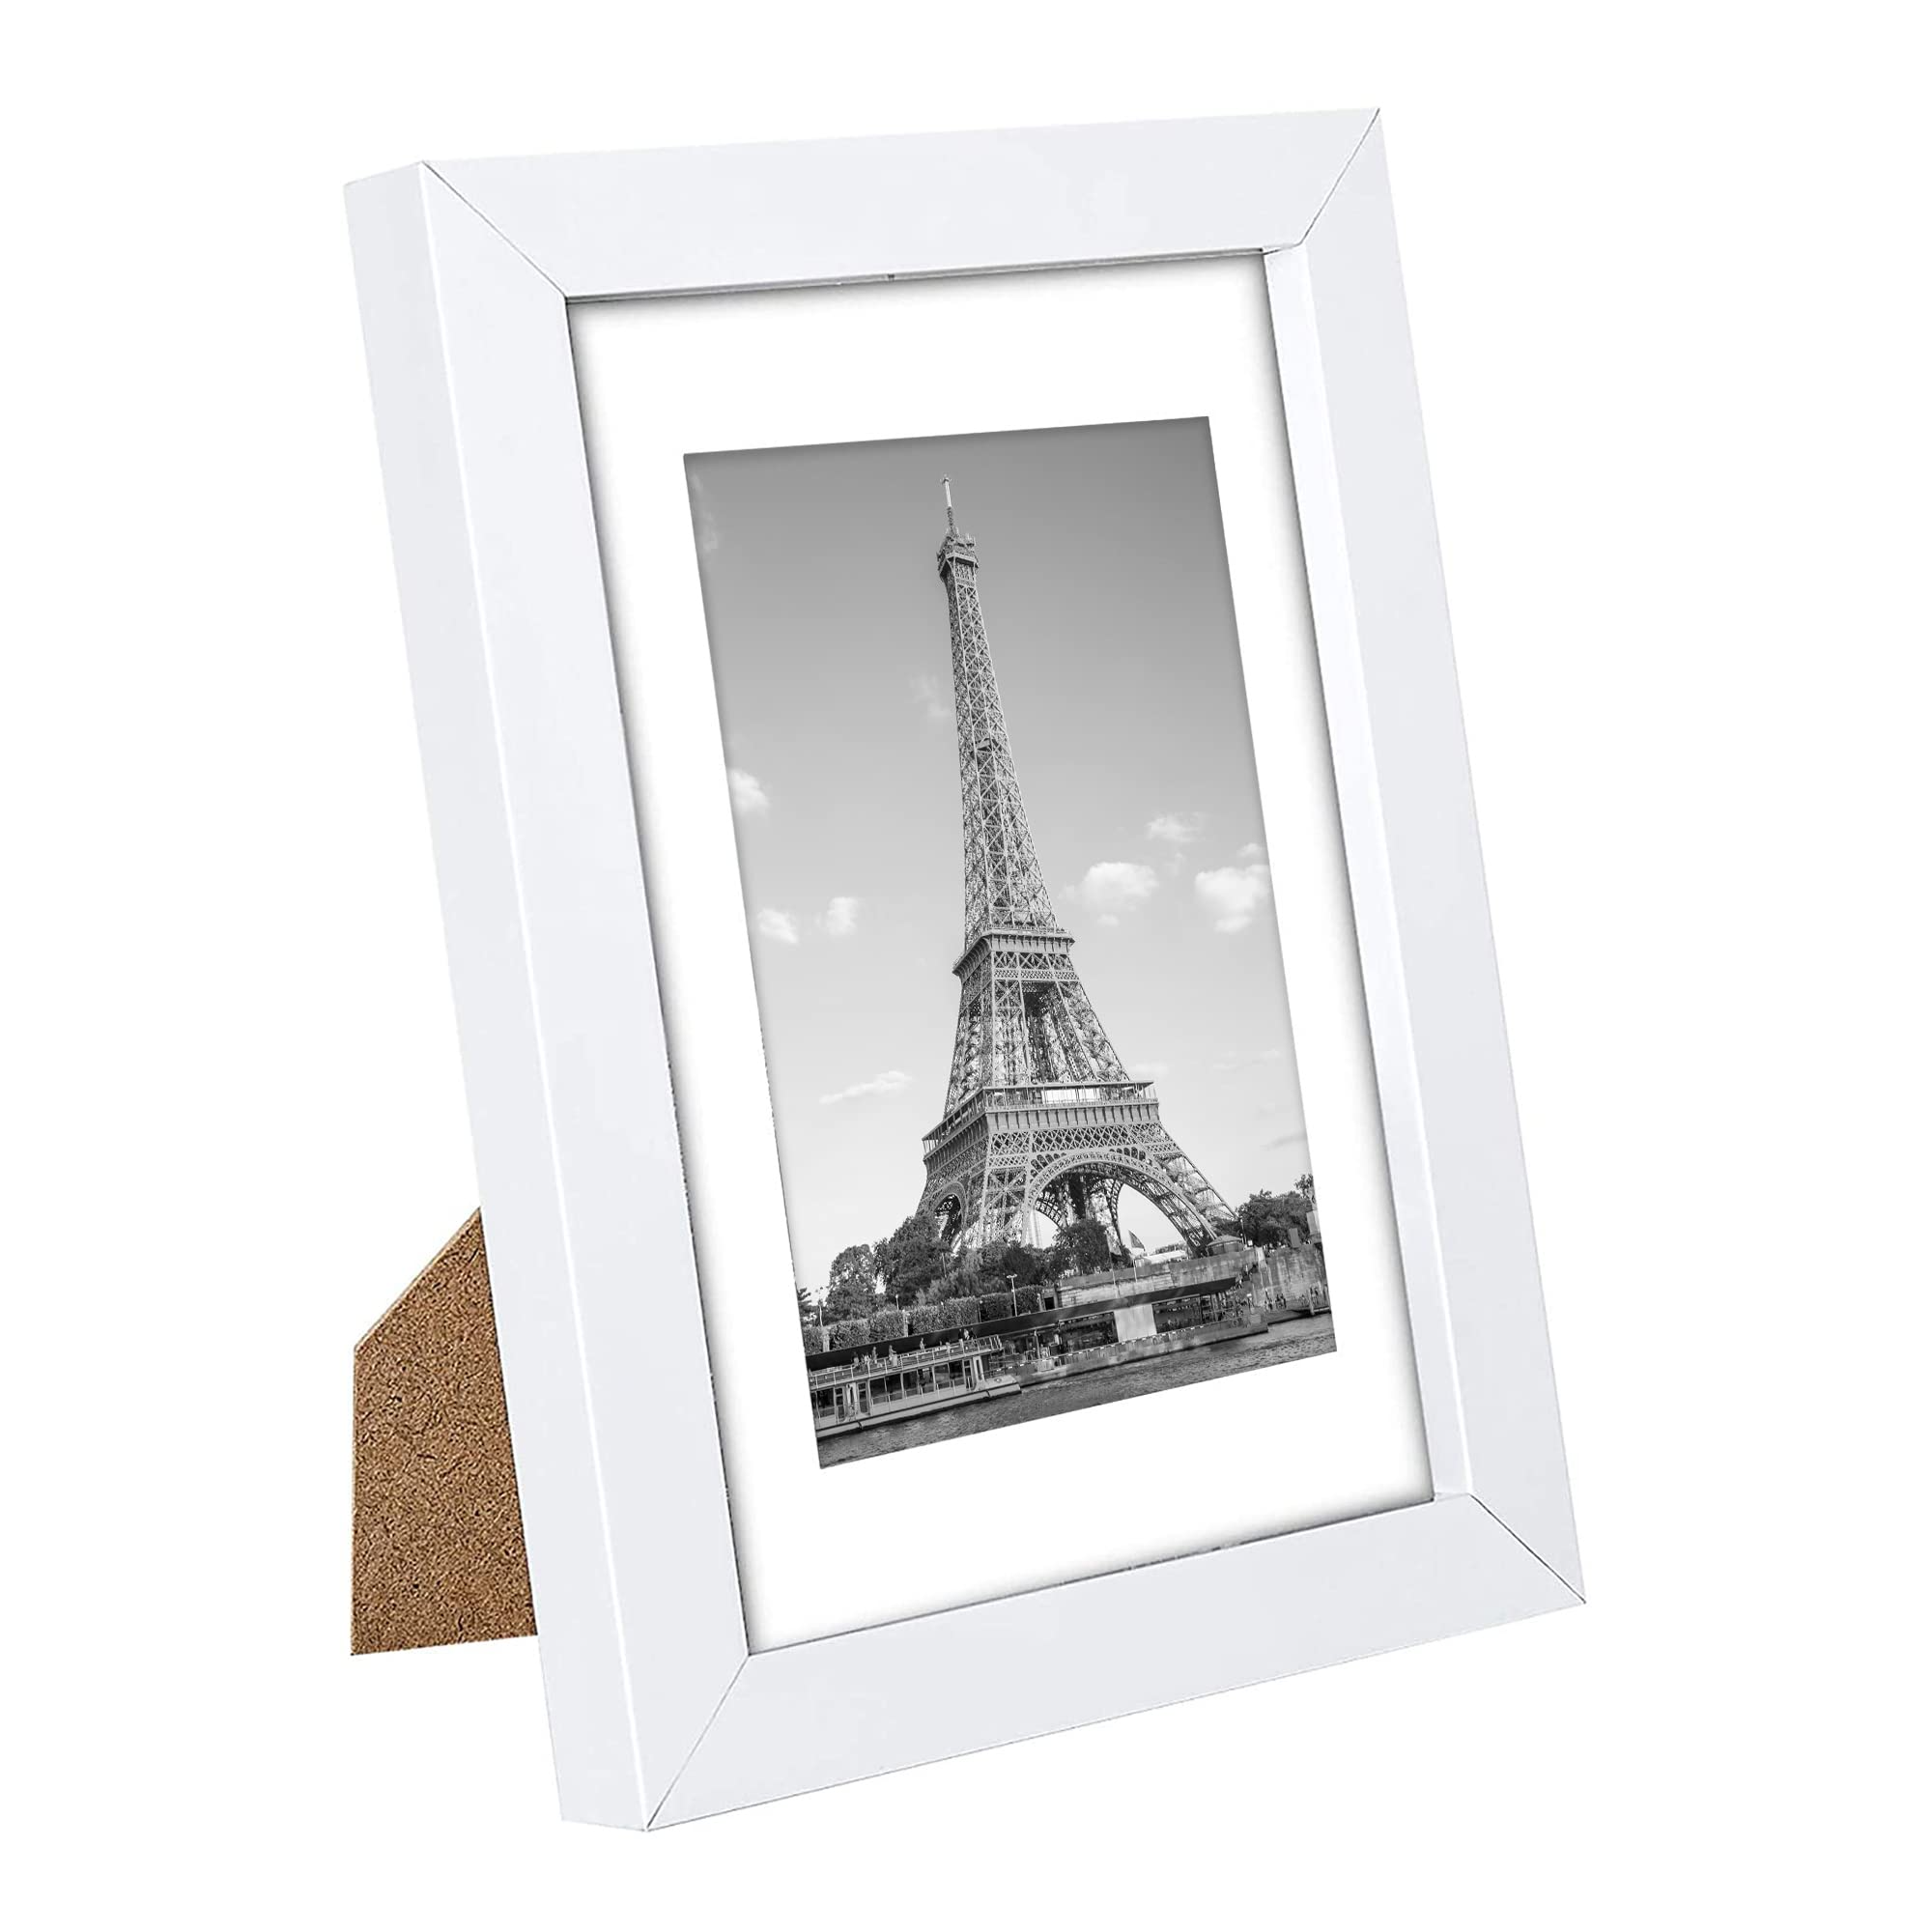 upsimples 5x7 Picture Frame Set of 10, Display Pictures 4x6 with Mat or 5x7  Without Mat, Multi Photo Frames Collage for Wall or Tabletop Display, Dark